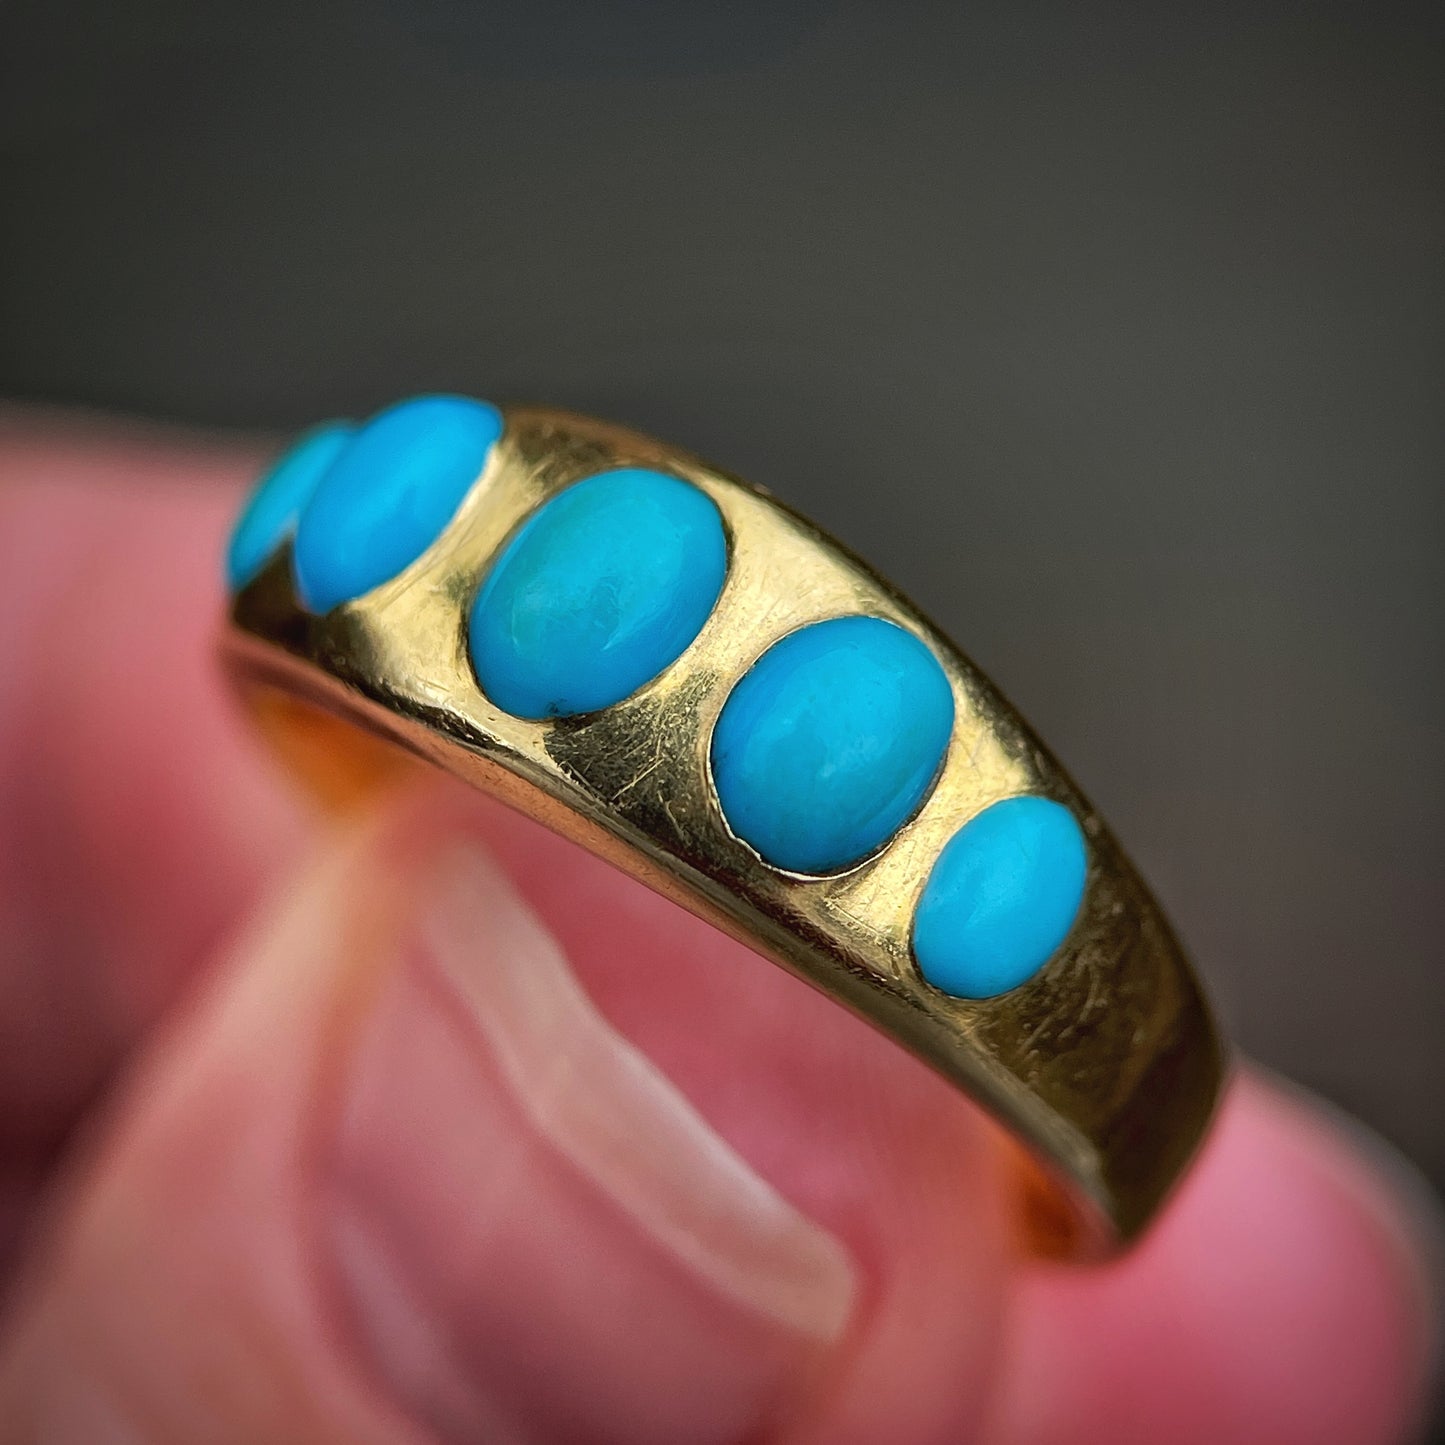 18ct Gold Antique Victorian Turquoise 5 Stone Gypsy Ring size S1 /2 HEAVY 6.8g